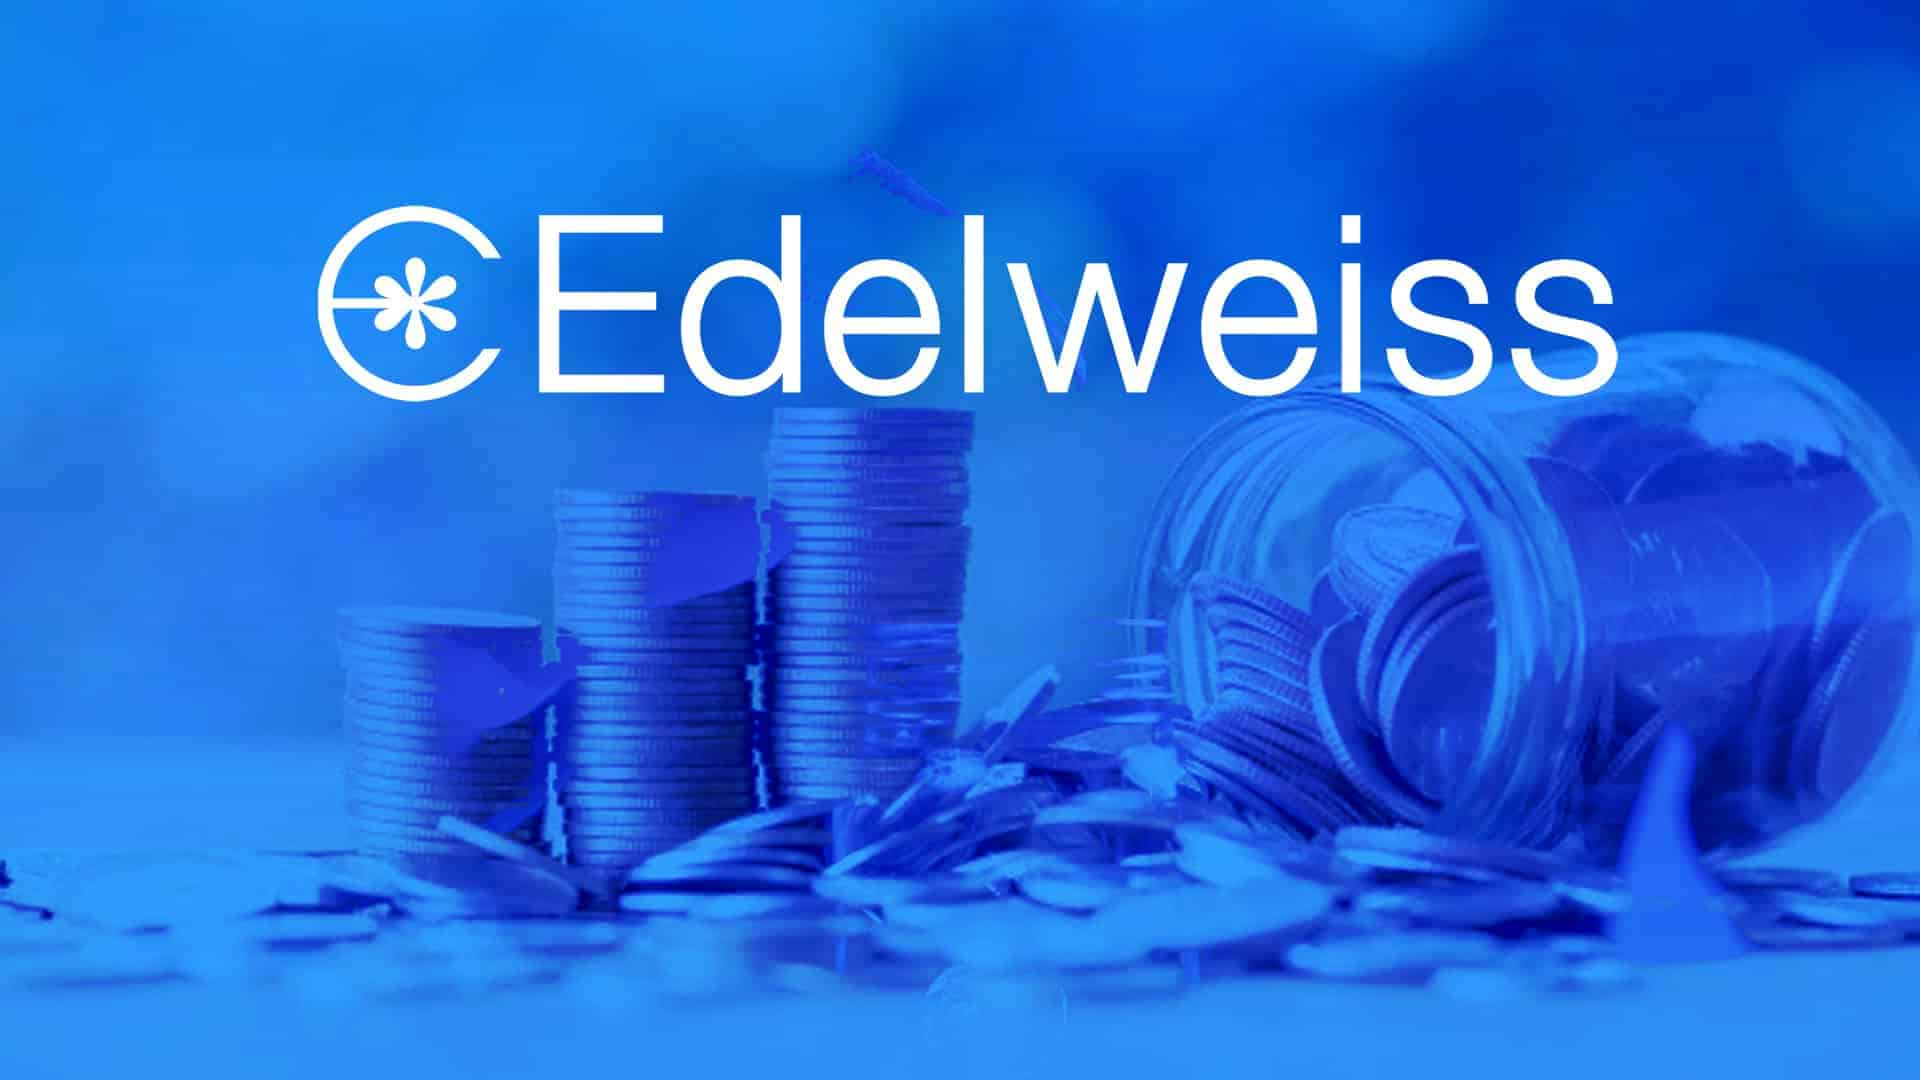 Edelweiss Broking to raise up to Rs 300 cr via NCD